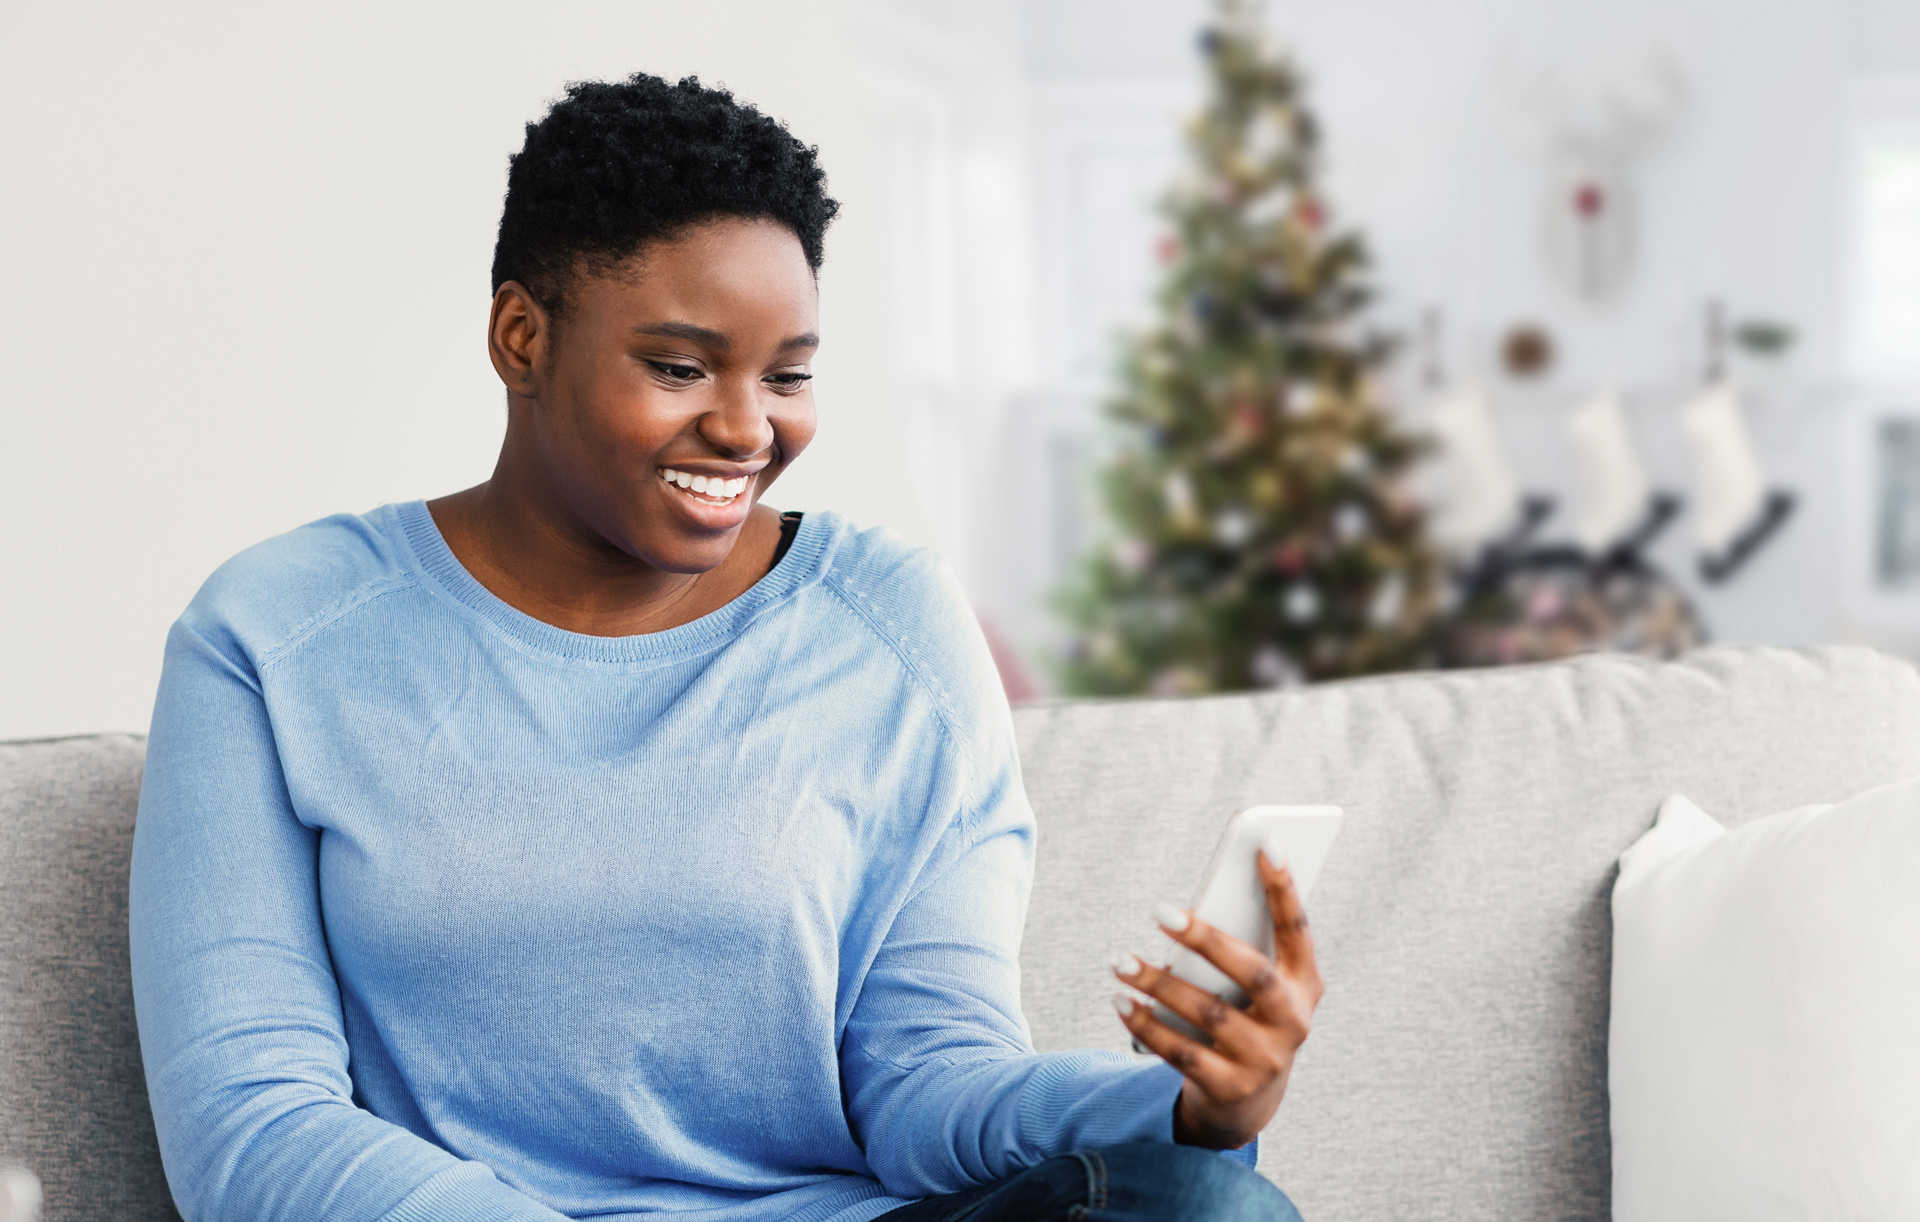 Behavioral Health solutions that help with managing stress associated with the holidays